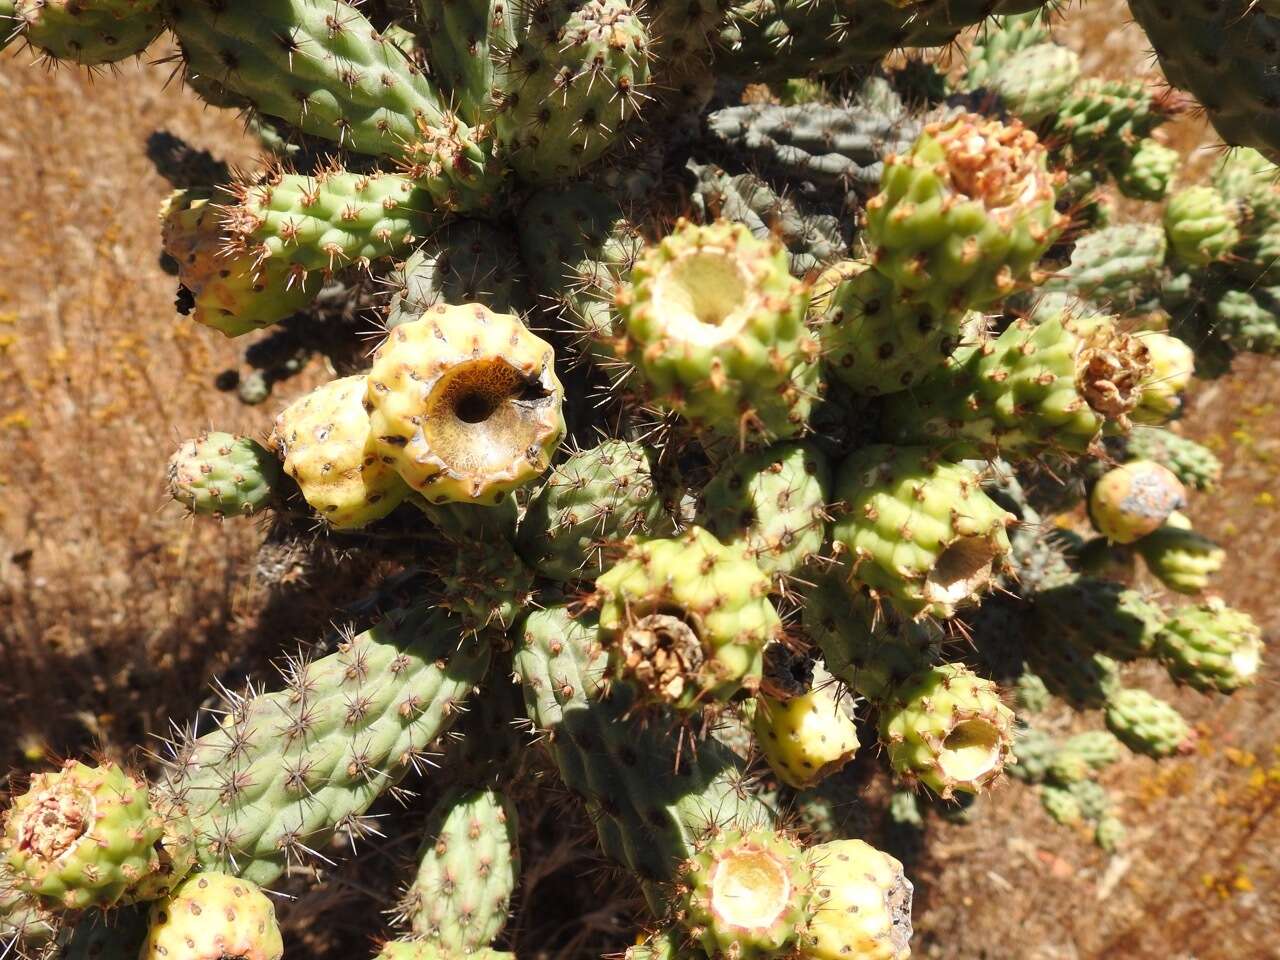 Image of Cylindropuntia alcahes (F. A. C. Weber) F. M. Knuth